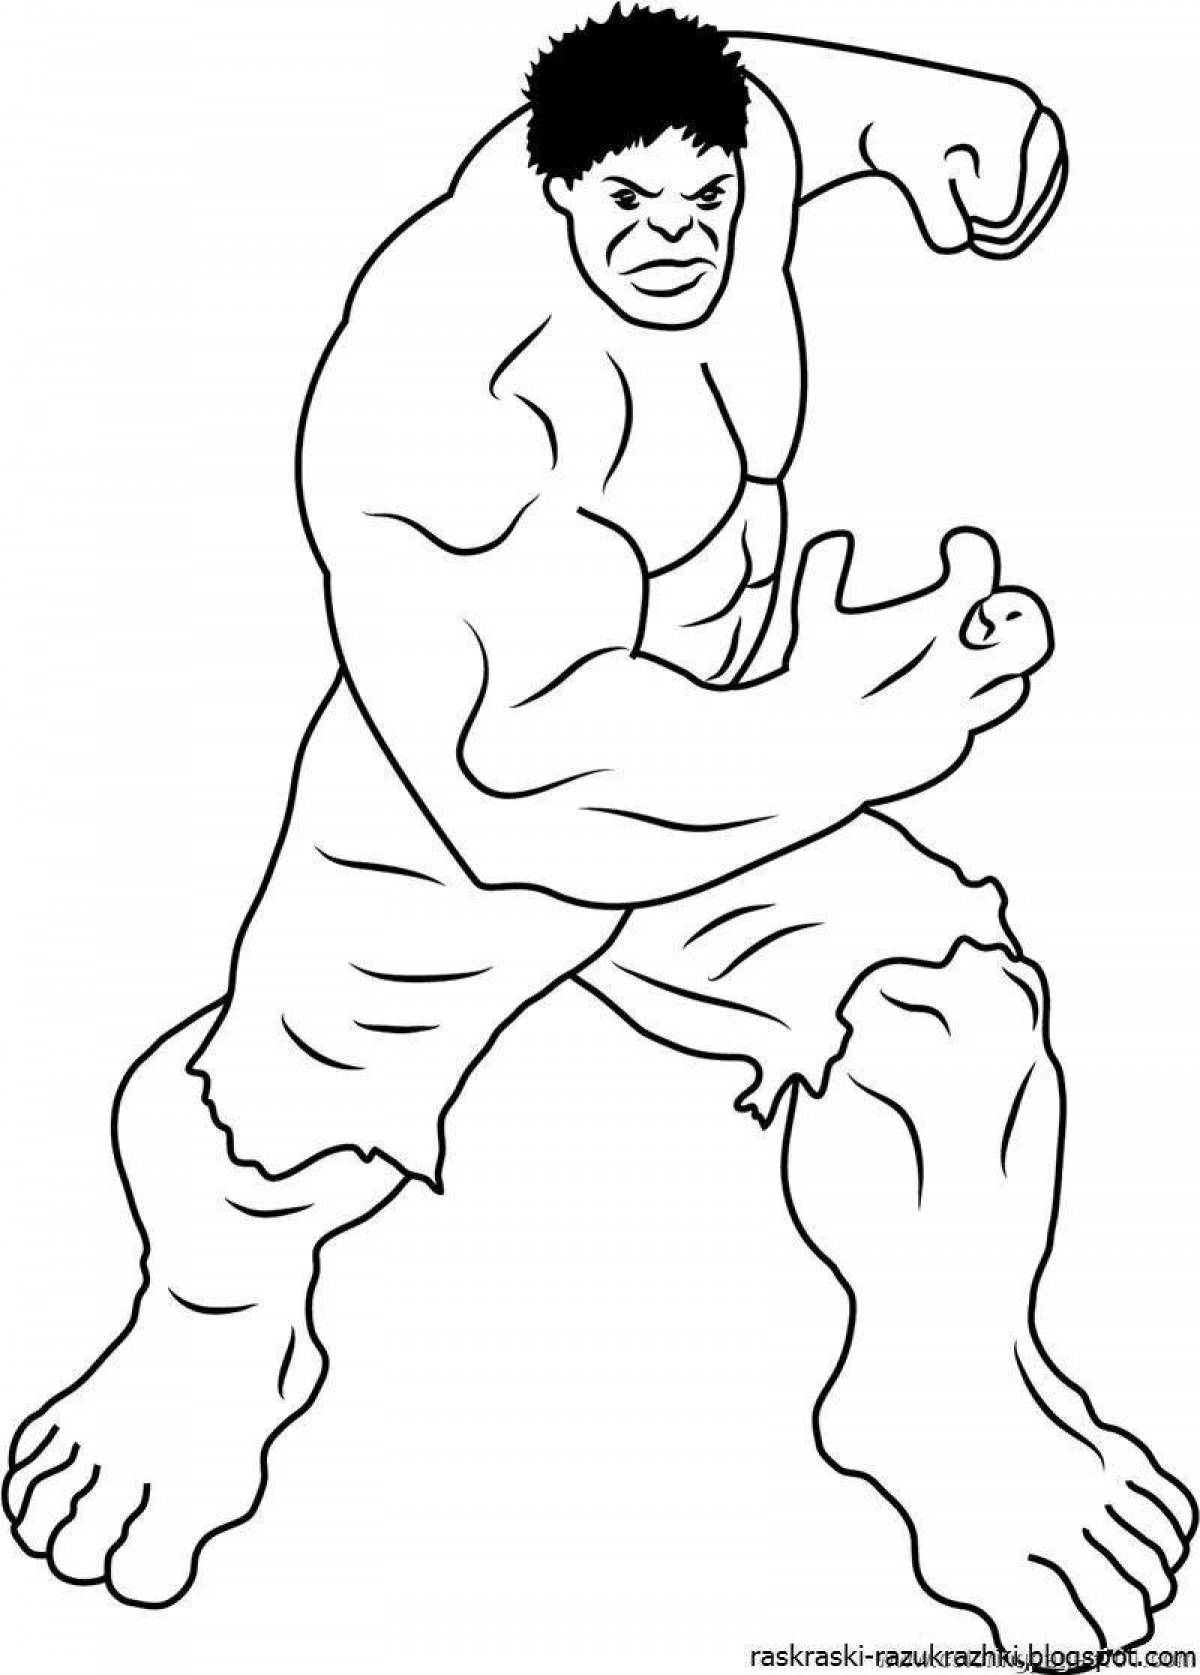 Great hulk coloring book for kids 6-7 years old